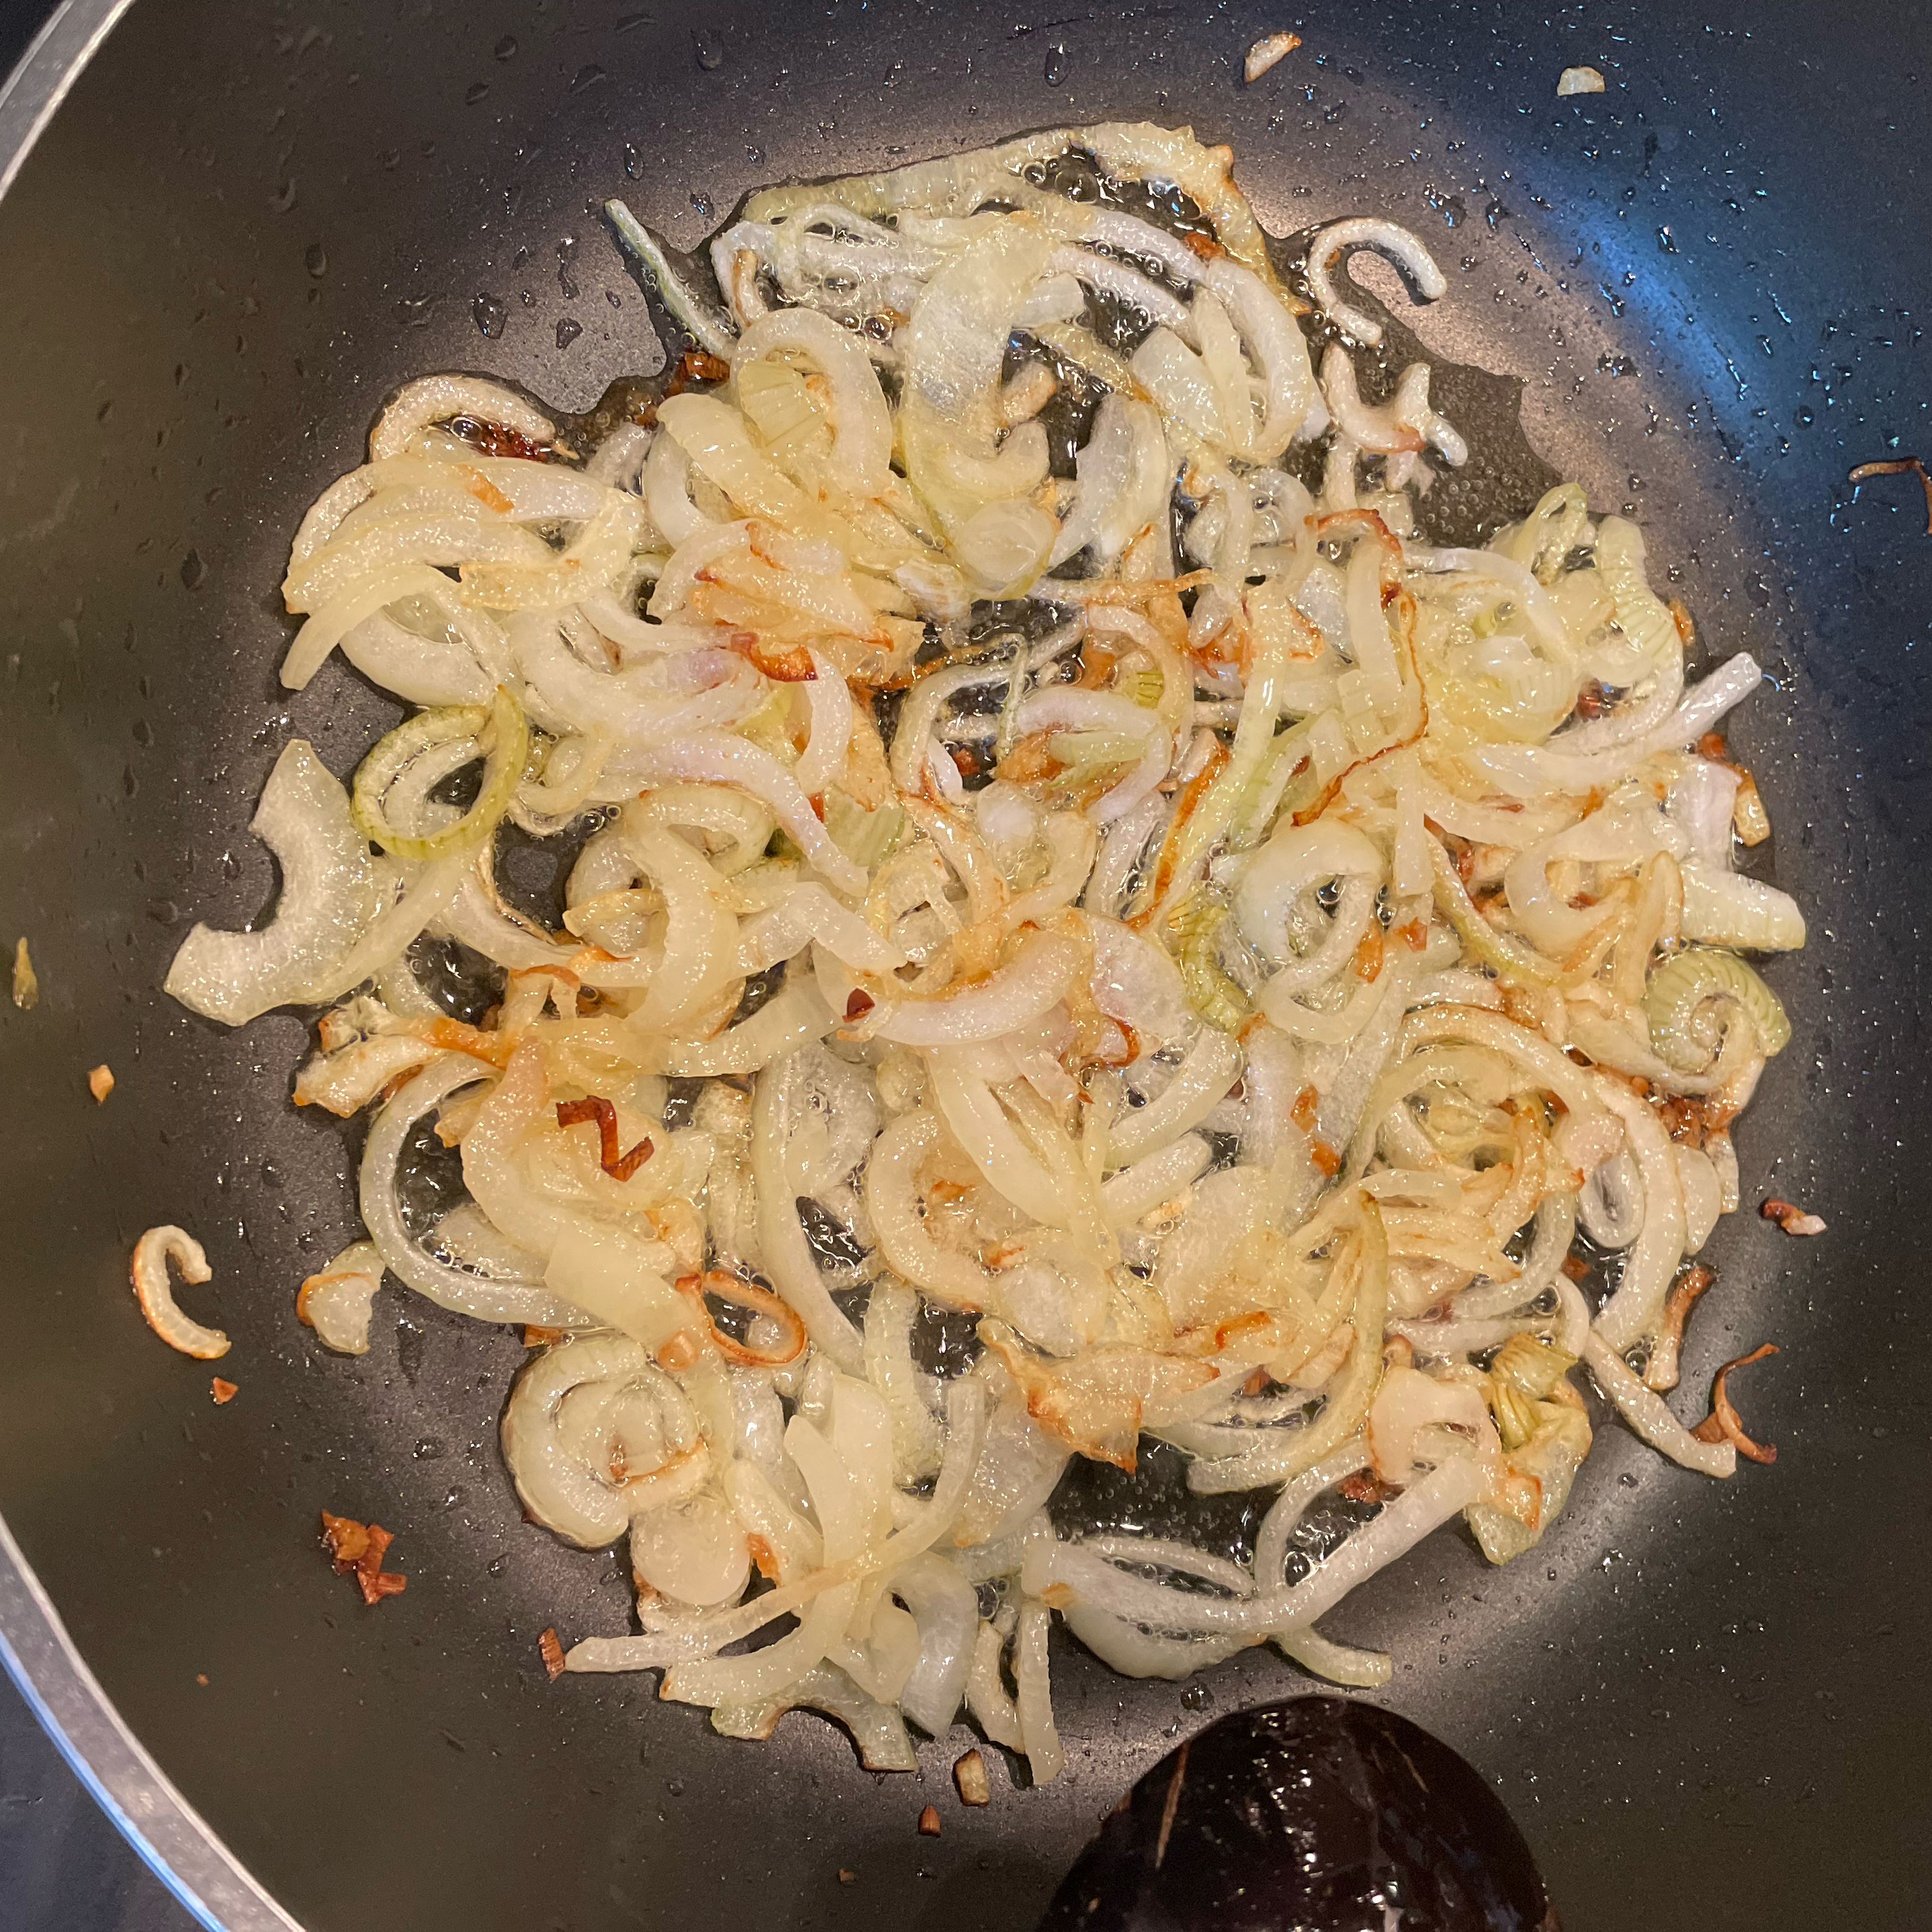 Heat the oil in a heavy pan and sauté the onions till golden brown, about 15 minutes.